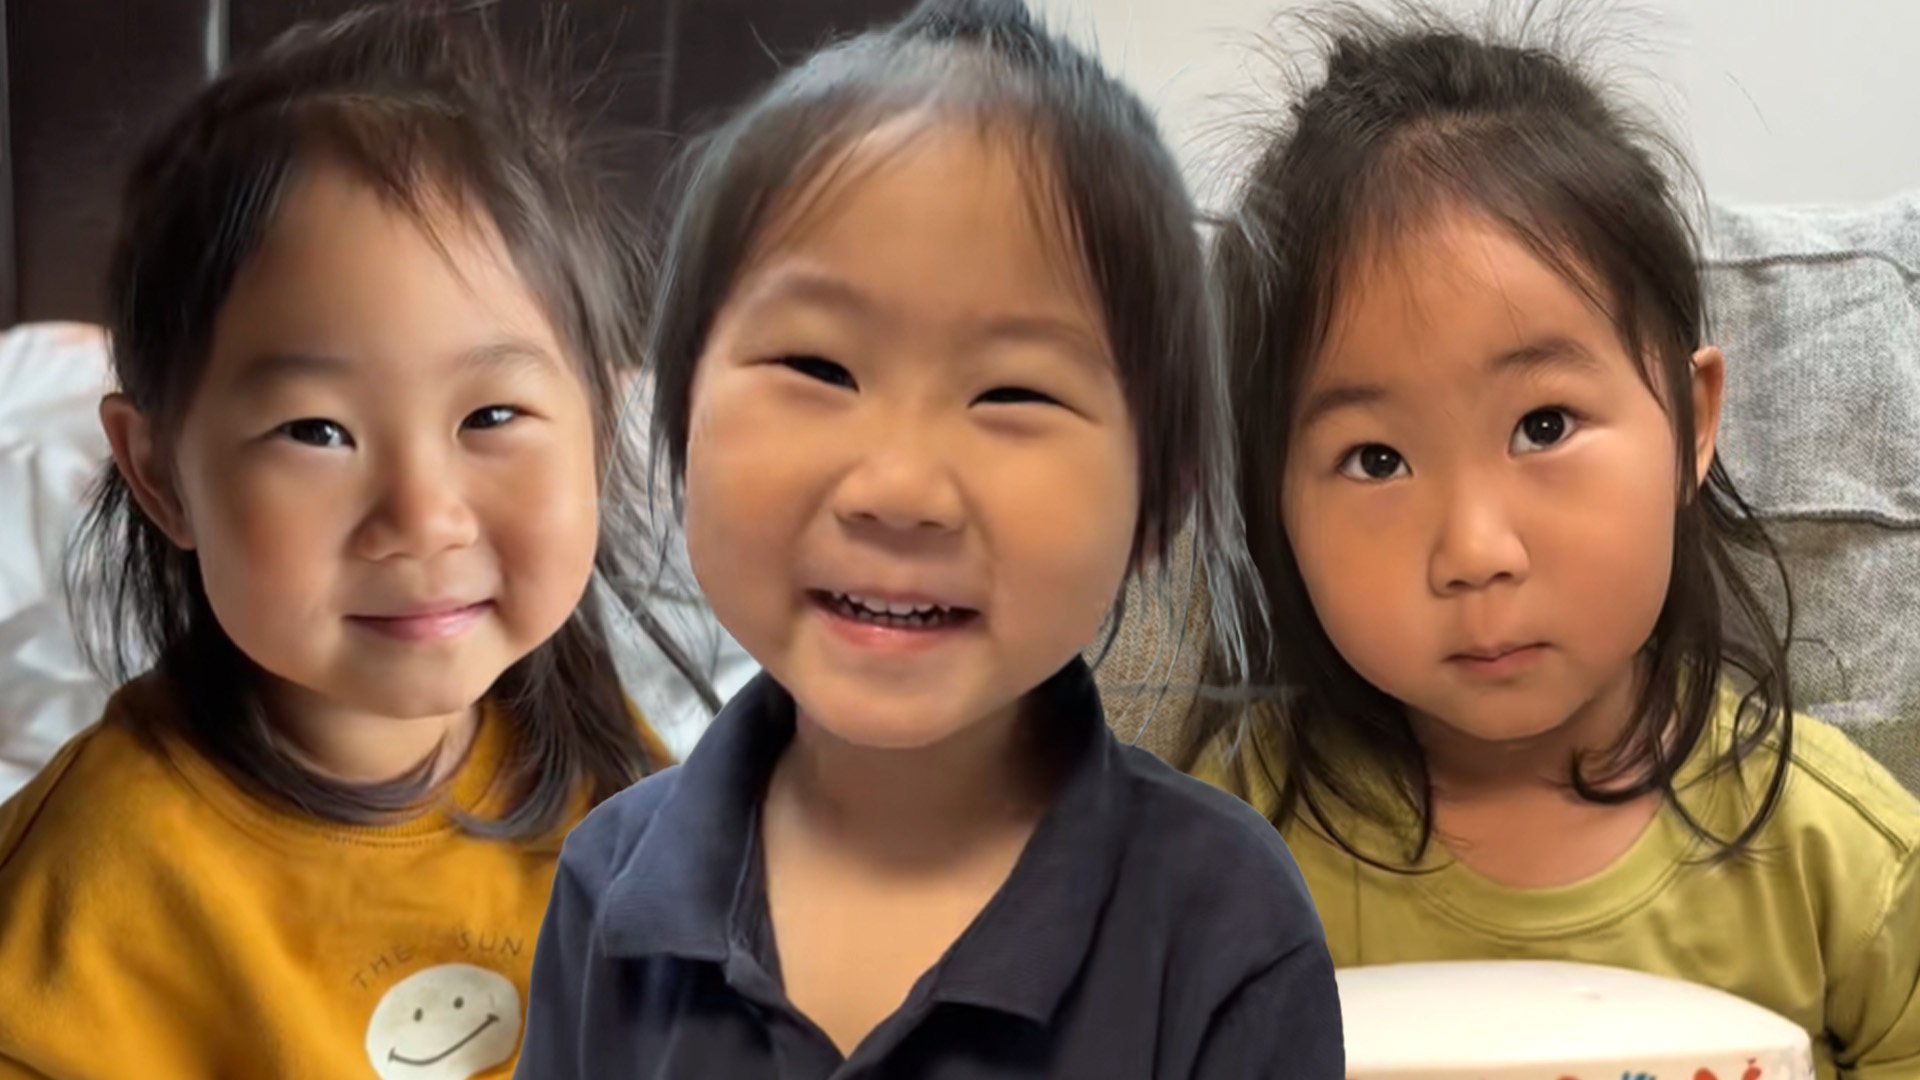 A three-year-old Chinese girl, affectionately called a “life mentor”, has gained admiration from 4.8 million online fans for her mature way of speaking, sparking discussions on parenting daughters in China. Photo: SCMP composite/Douyin